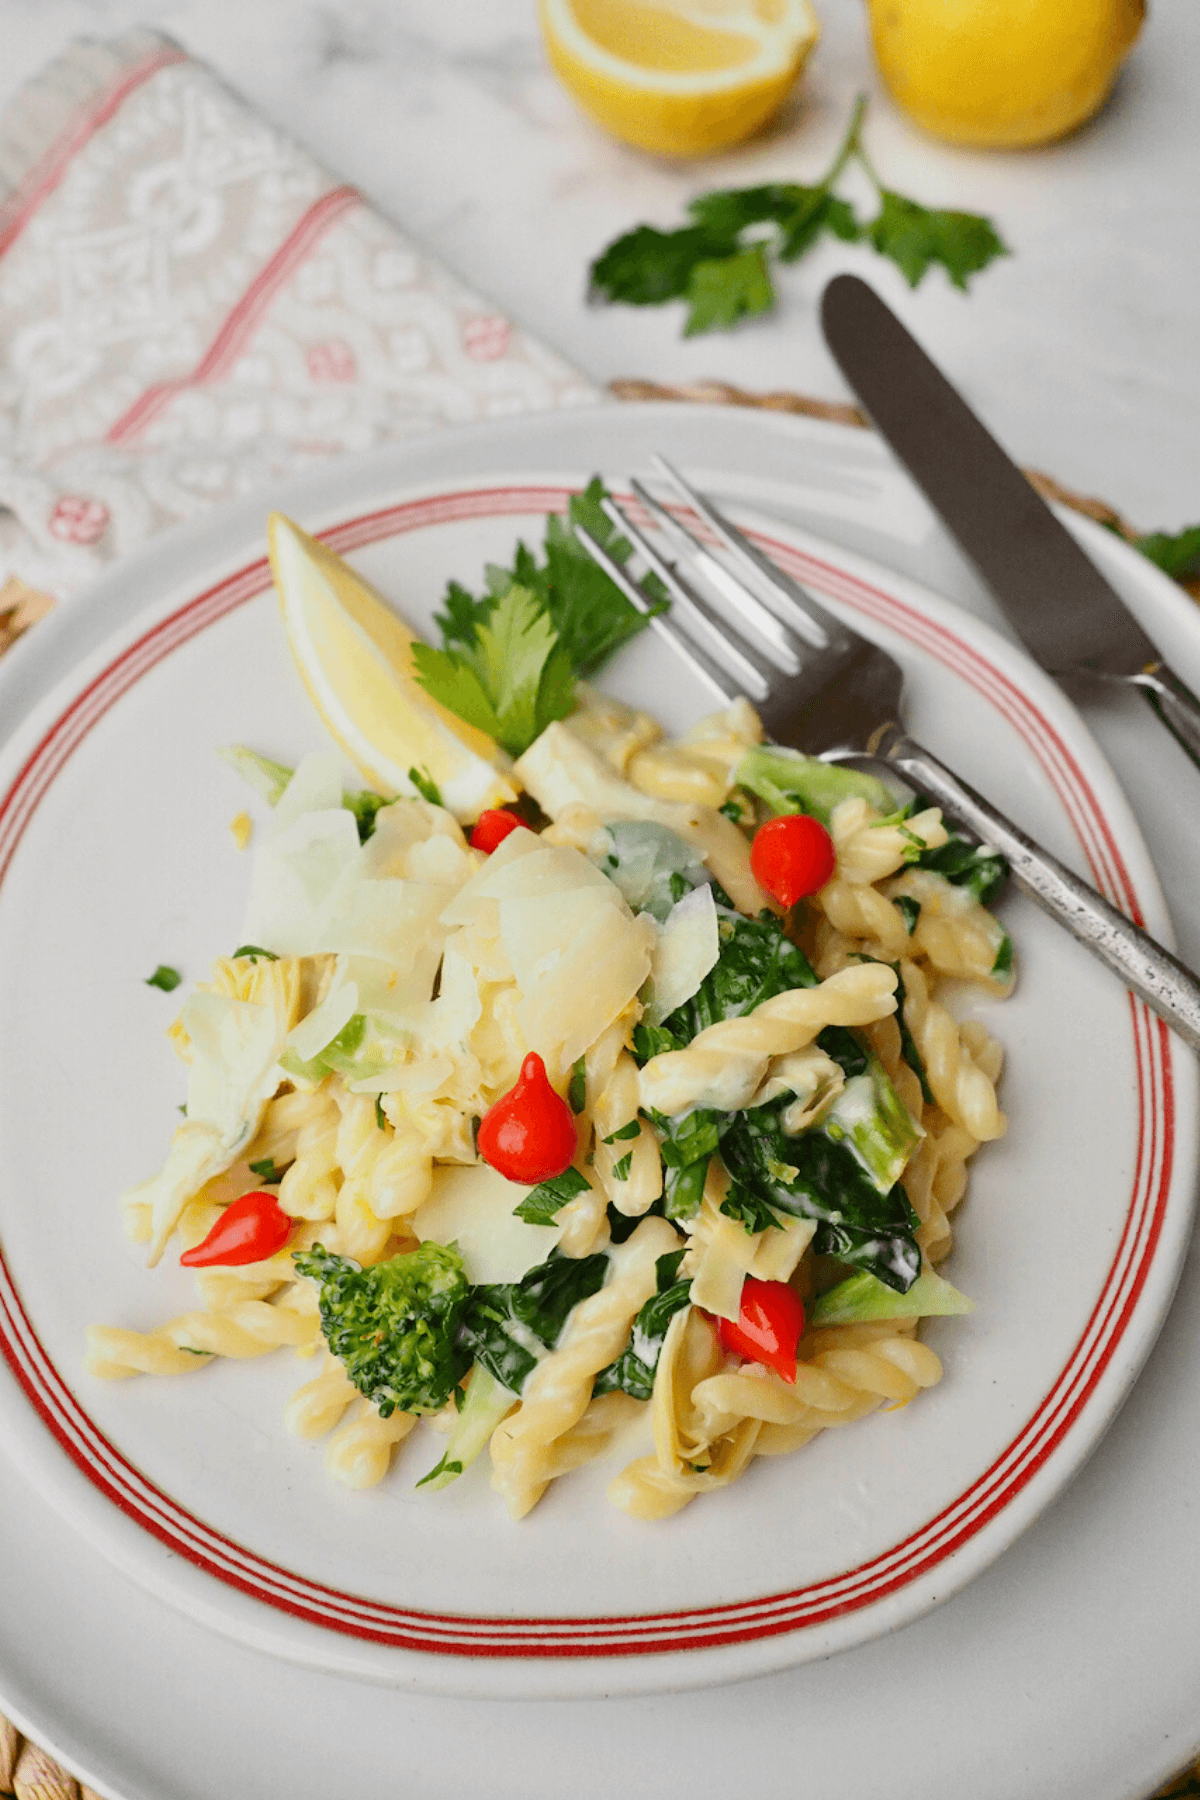 Lemon garlic pasta recipe on plate with pops of sweet peppers, spinach, artichoke hearts, lemon wedge and garnished with shaved parmesan.